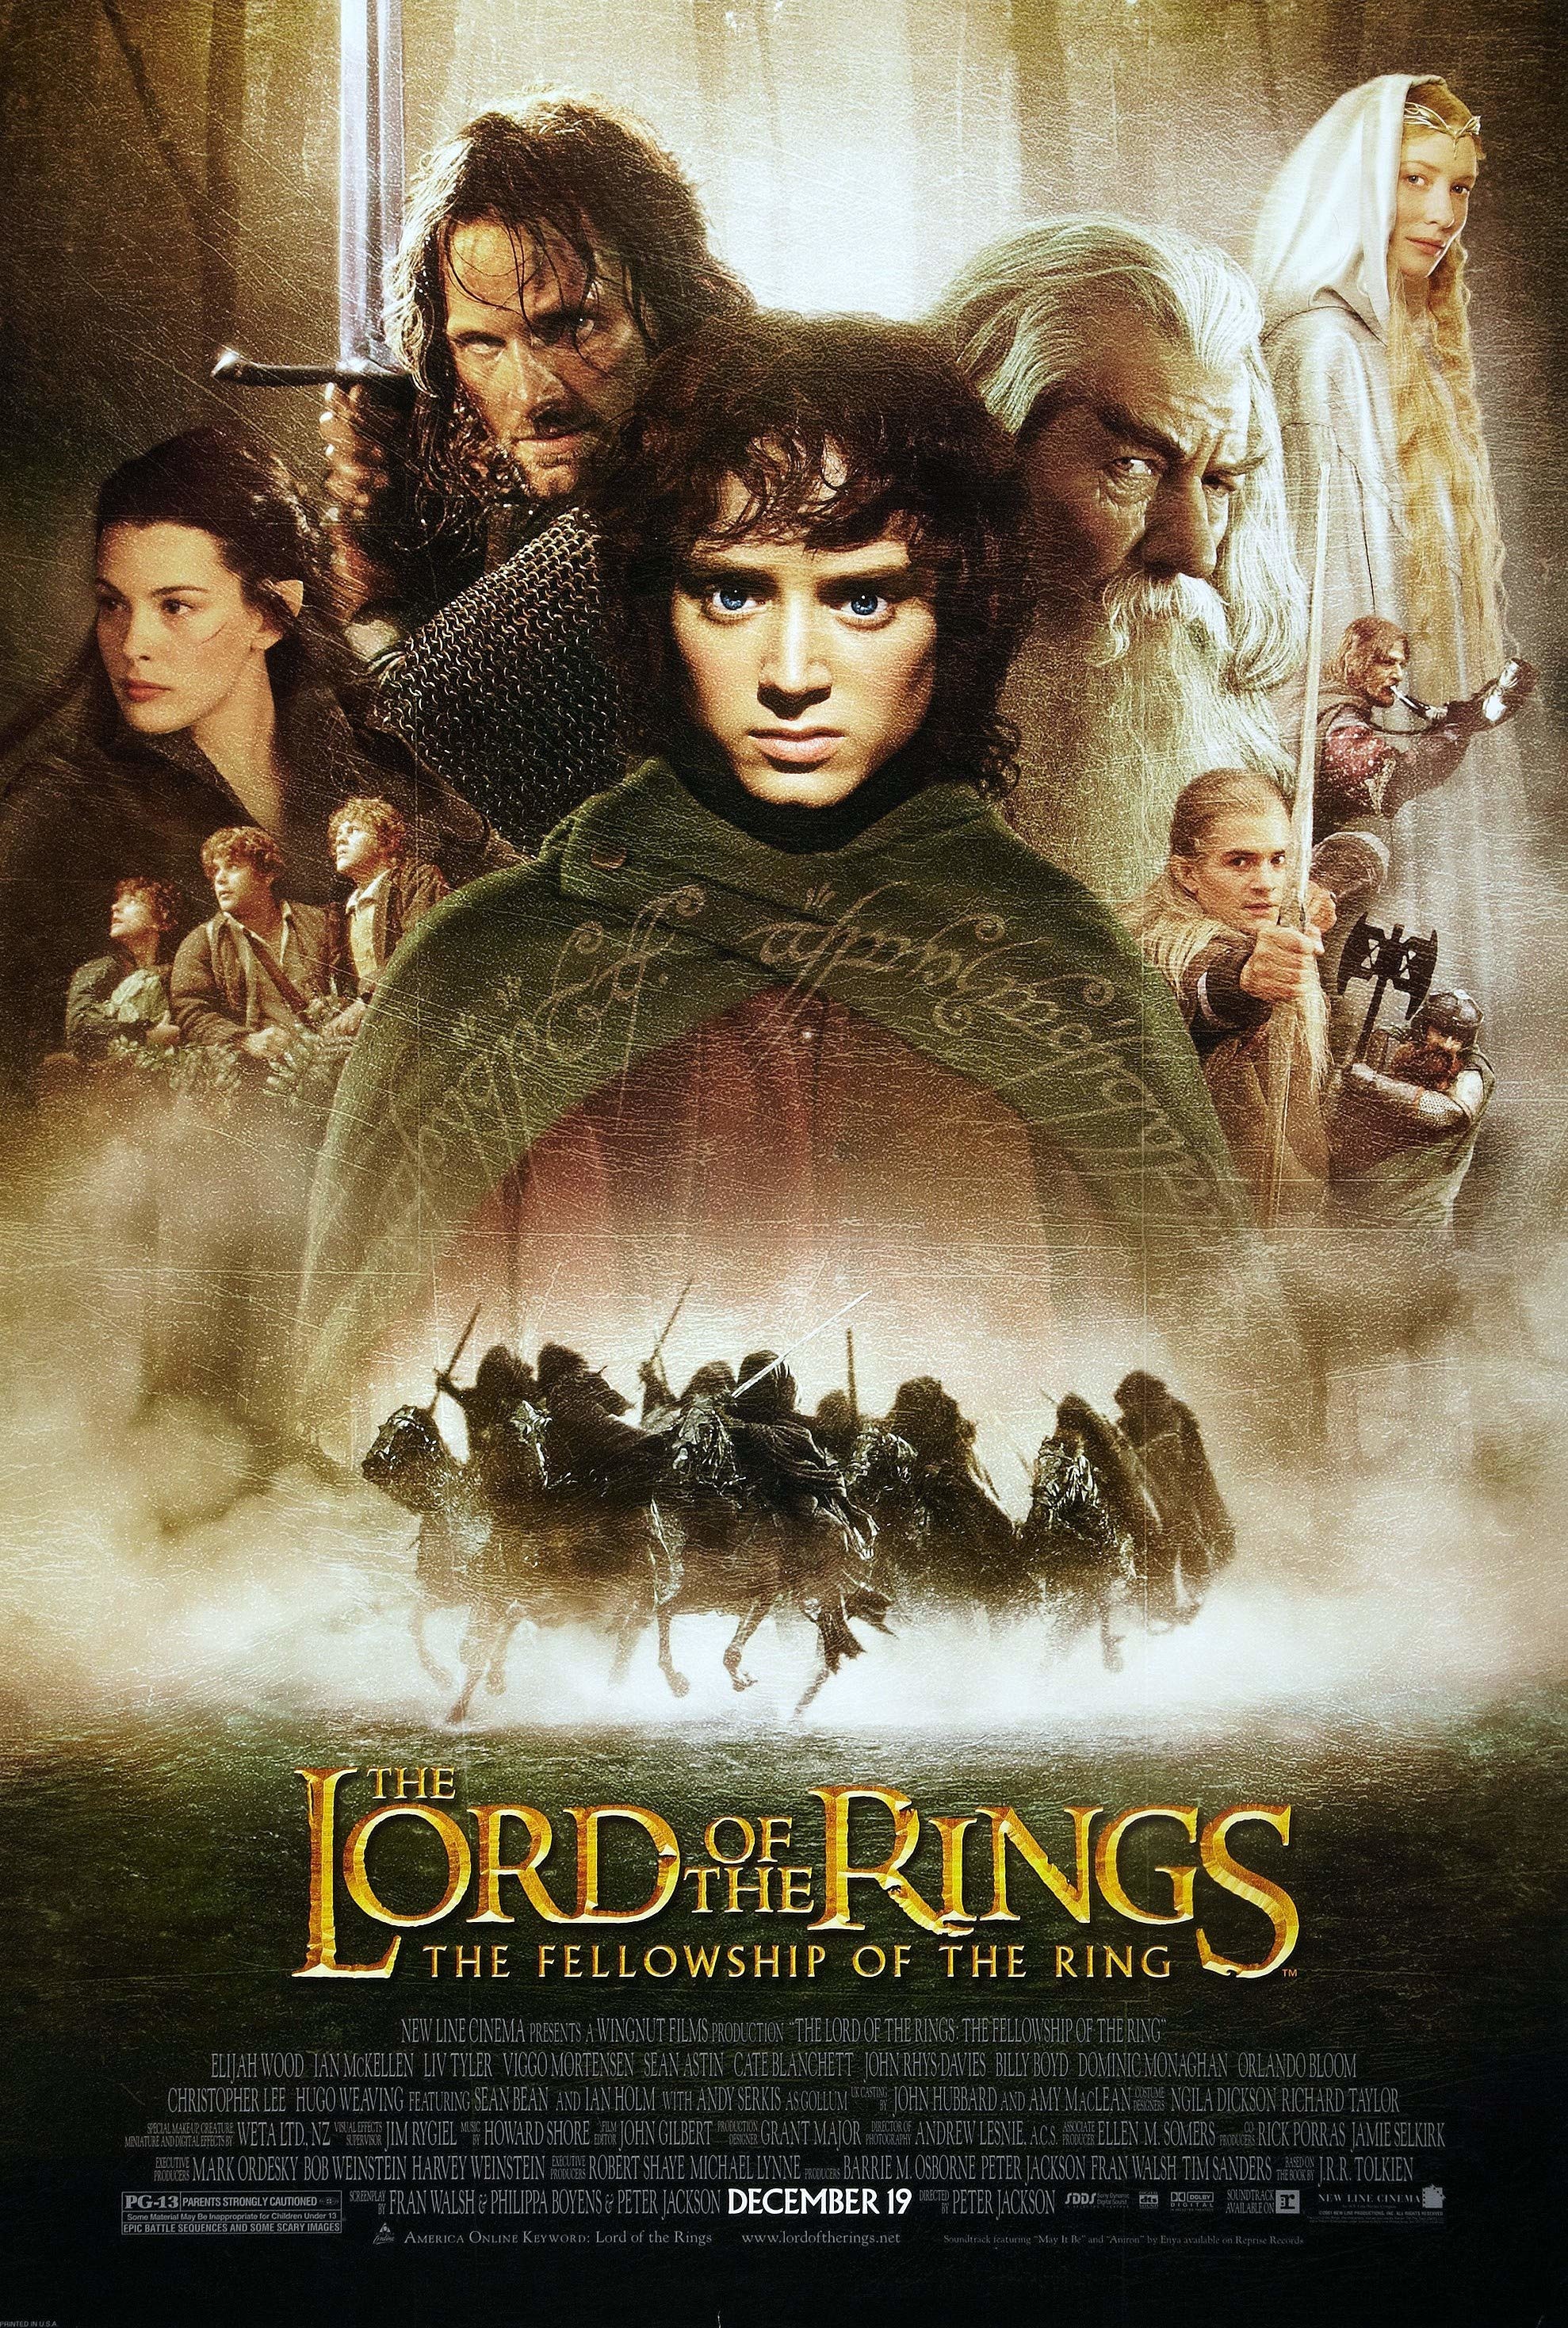 Adaptations of The Lord of the Rings